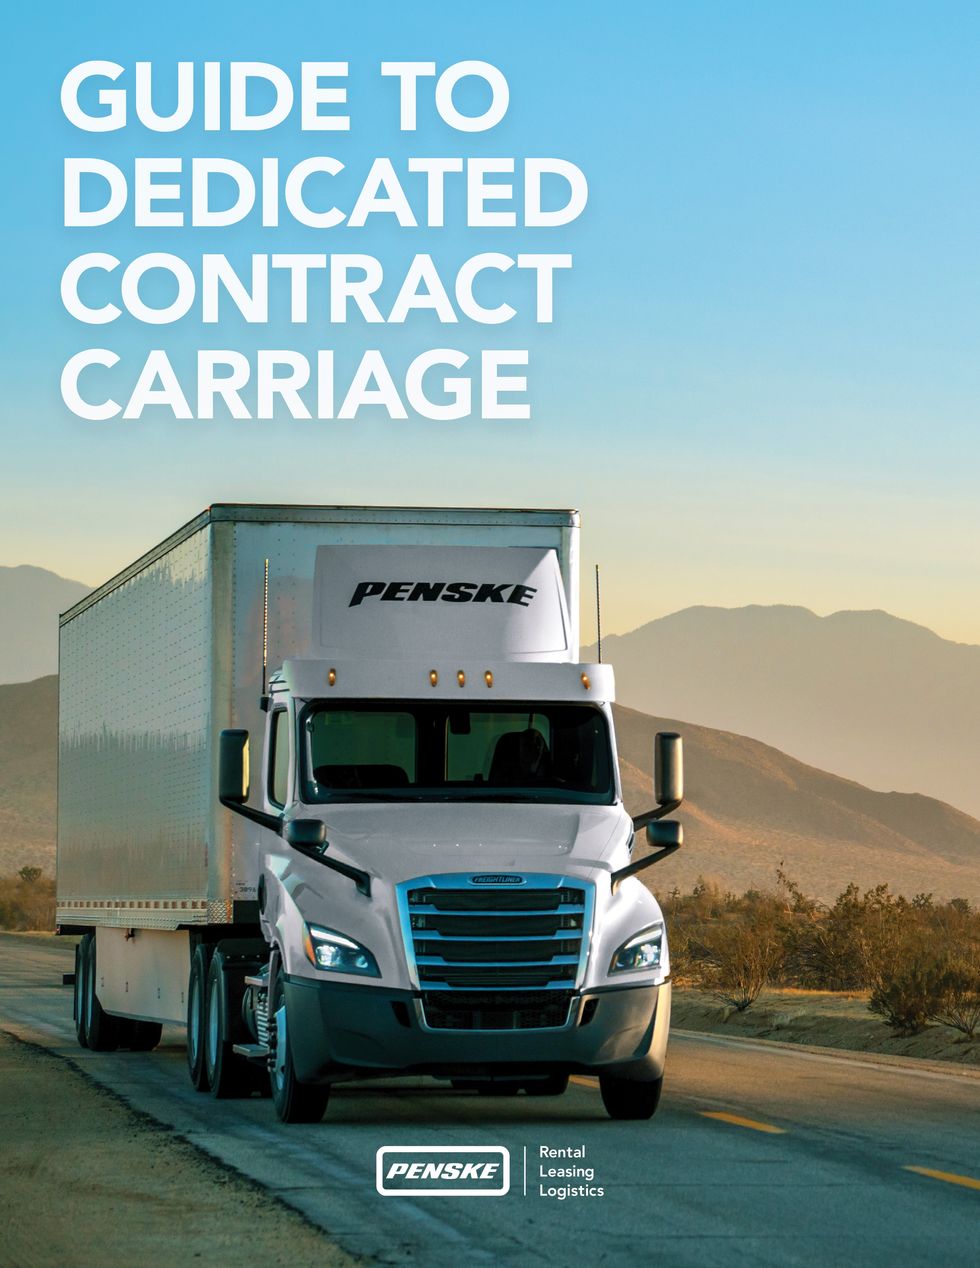 
Penske Logistics Delivers New Guide to Dedicated Contract Carriage Services
